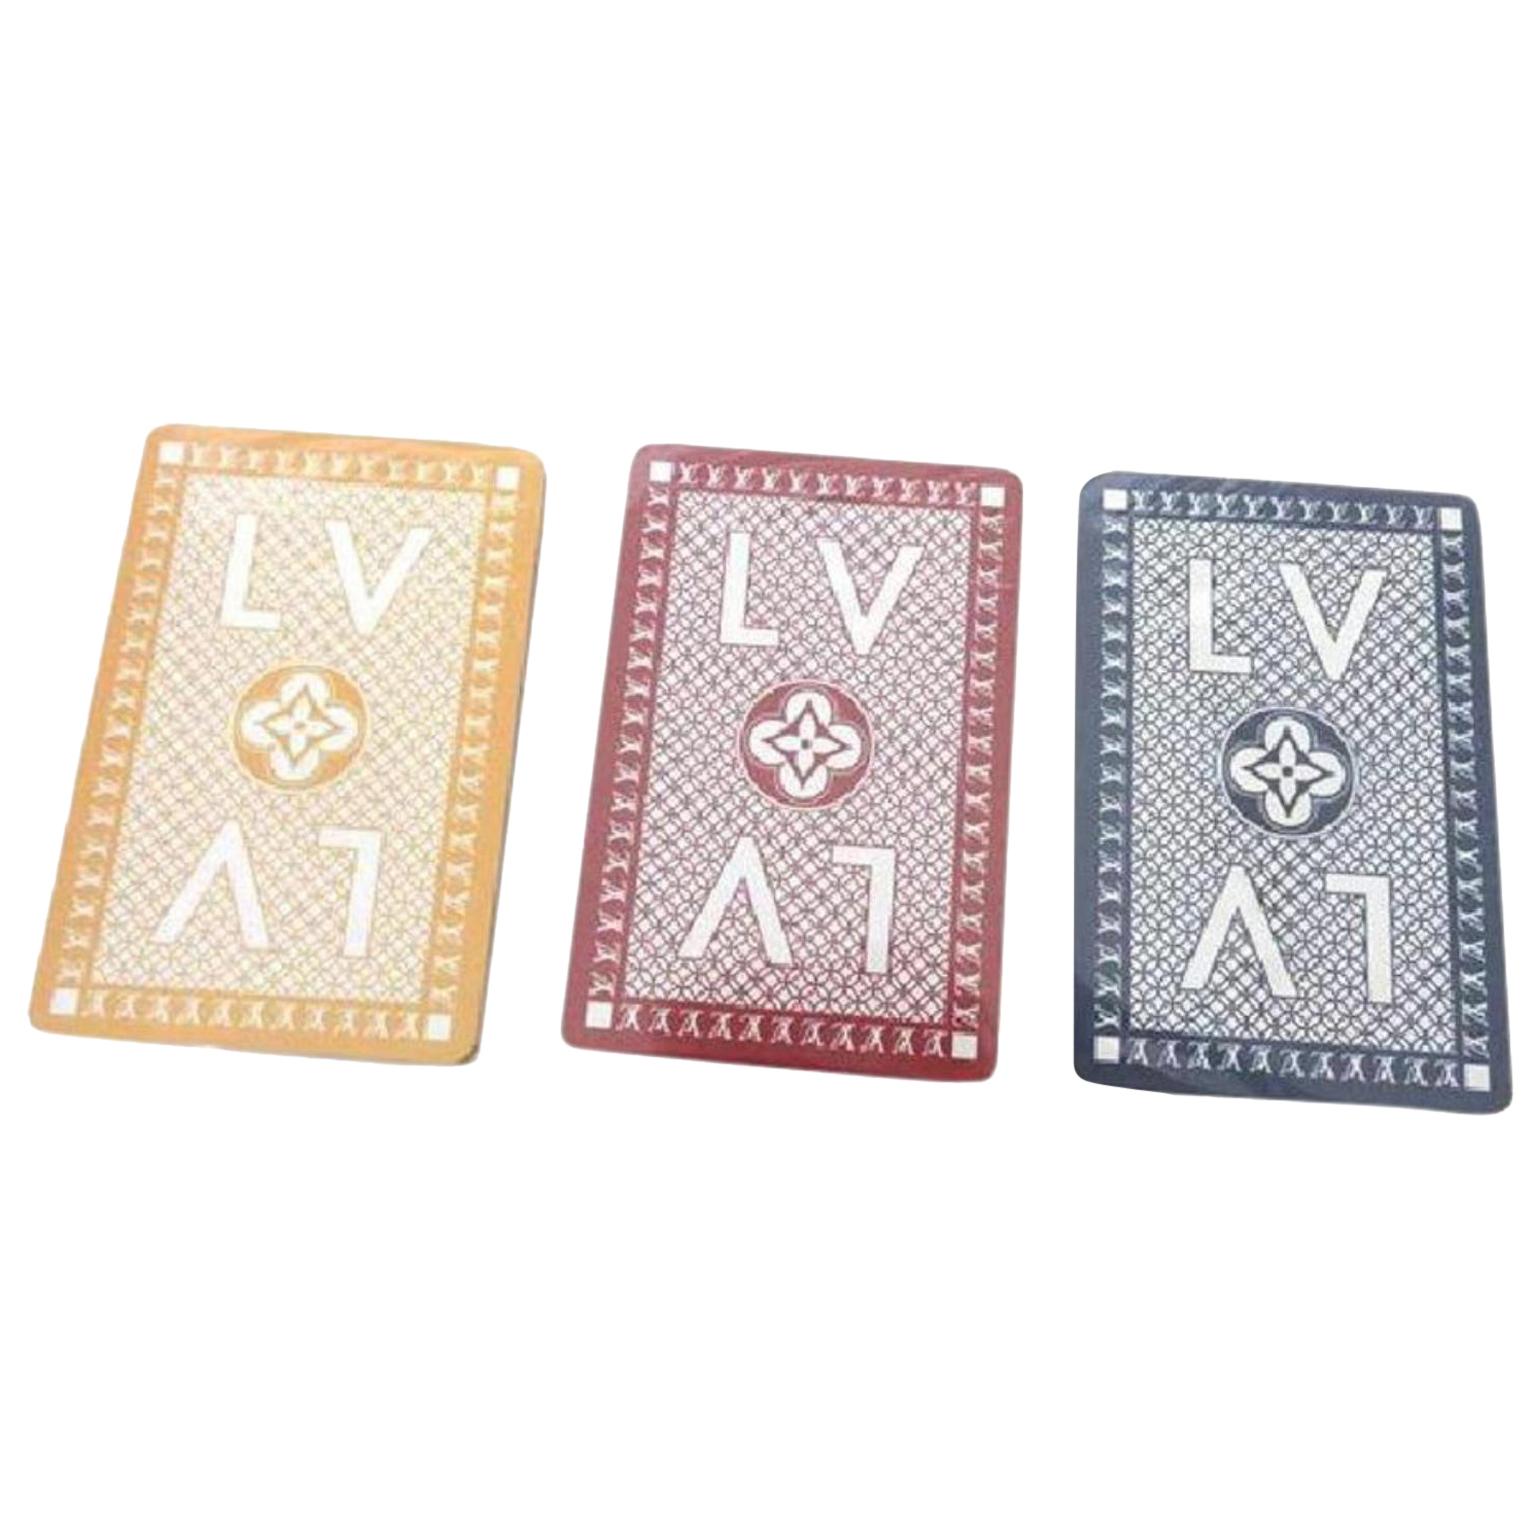 LOUIS VUITTON VIP Playing Cards Monogram 2 Colors with Box Gift Set  Authentic